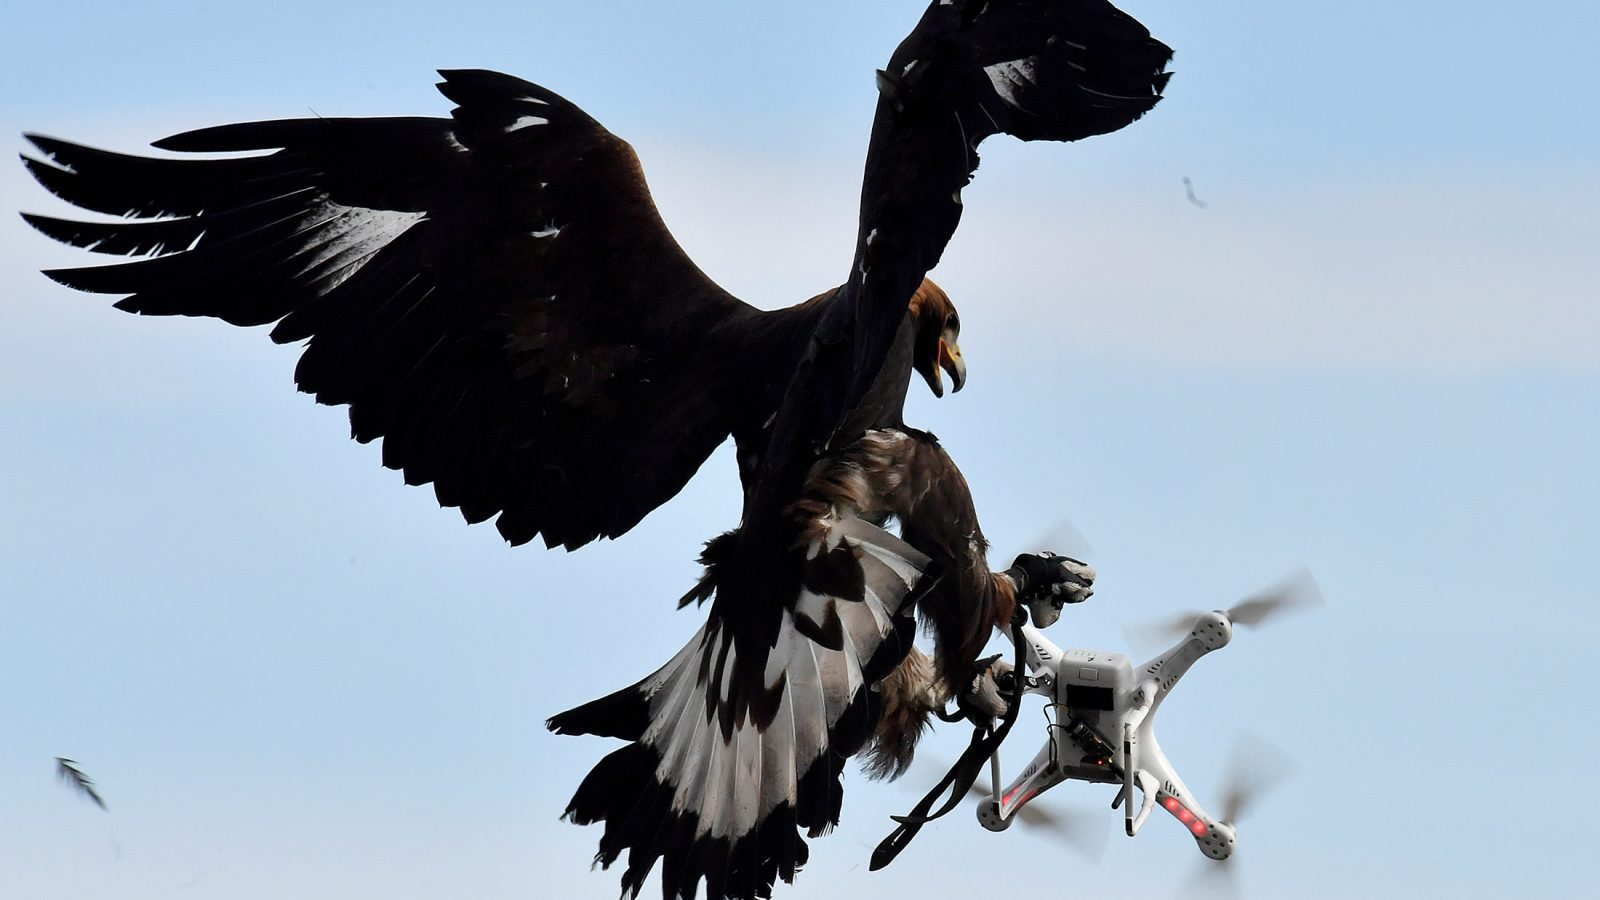 TO GO WITH AFP STORY BY PHILIPPE BERNES-LASSERRE A royal eagle catches a drone during flight during a military exercise at the Mont-de-Marsan airbase, southwestern France, on February 10, 2017. As malicious or poorly controlled drones are becoming more and more a security threat, the French army explores all options for defence. They train royal eagles for six months at the airbase to chase drones. / AFP / GEORGES GOBET (Photo credit should read GEORGES GOBET/AFP/Getty Images)